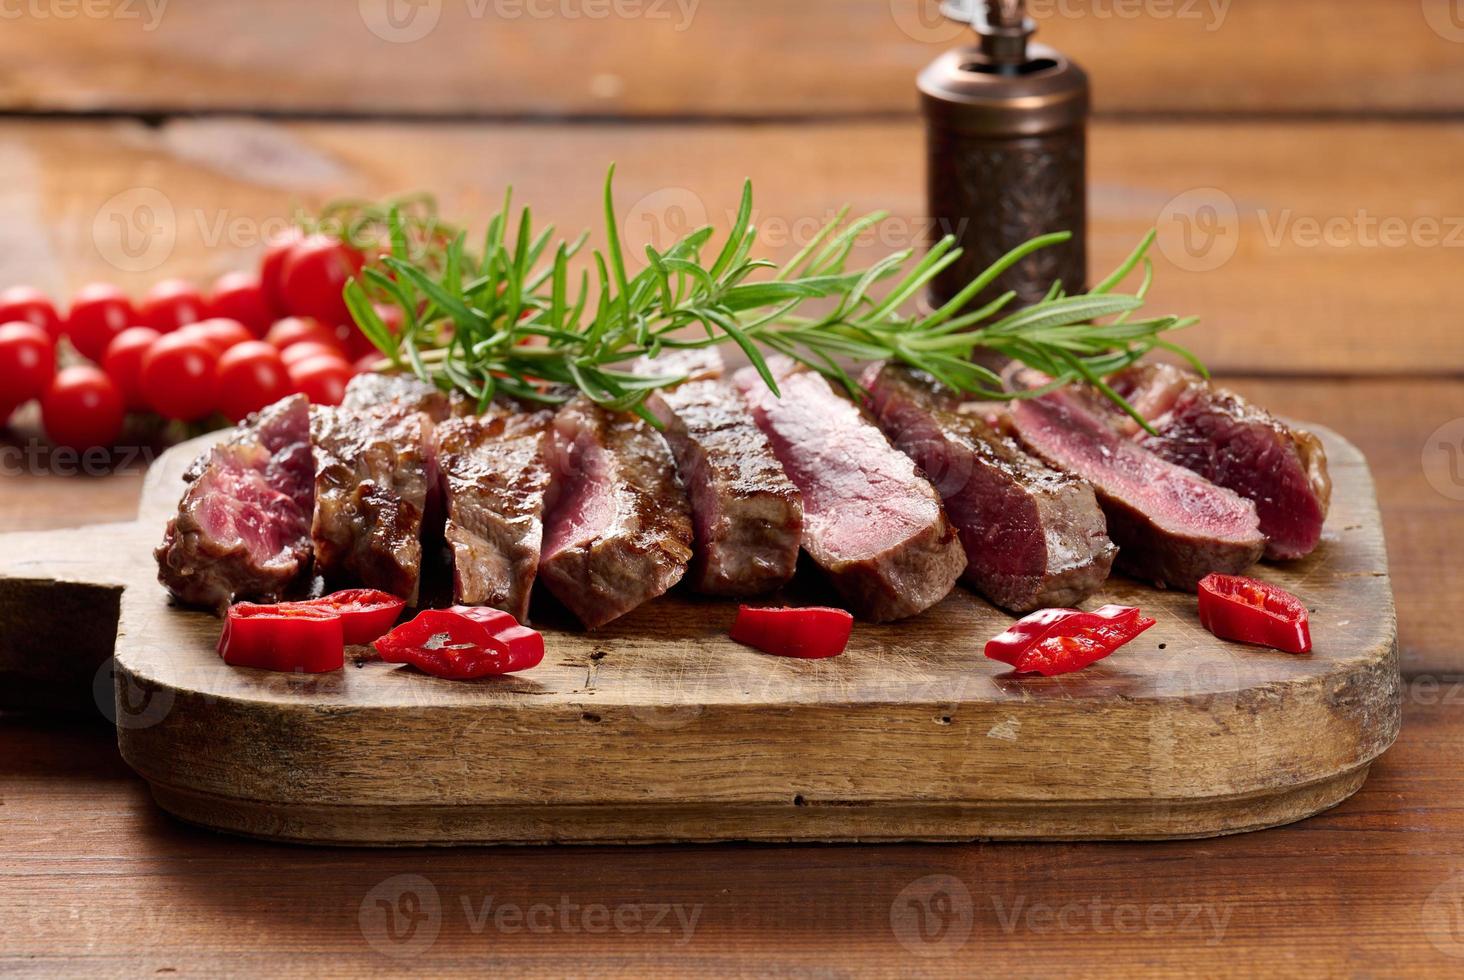 https://static.vecteezy.com/system/resources/previews/019/621/854/non_2x/roasted-piece-of-beef-ribeye-cut-into-pieces-on-a-vintage-brown-chopping-board-well-done-appetizing-steak-photo.jpg